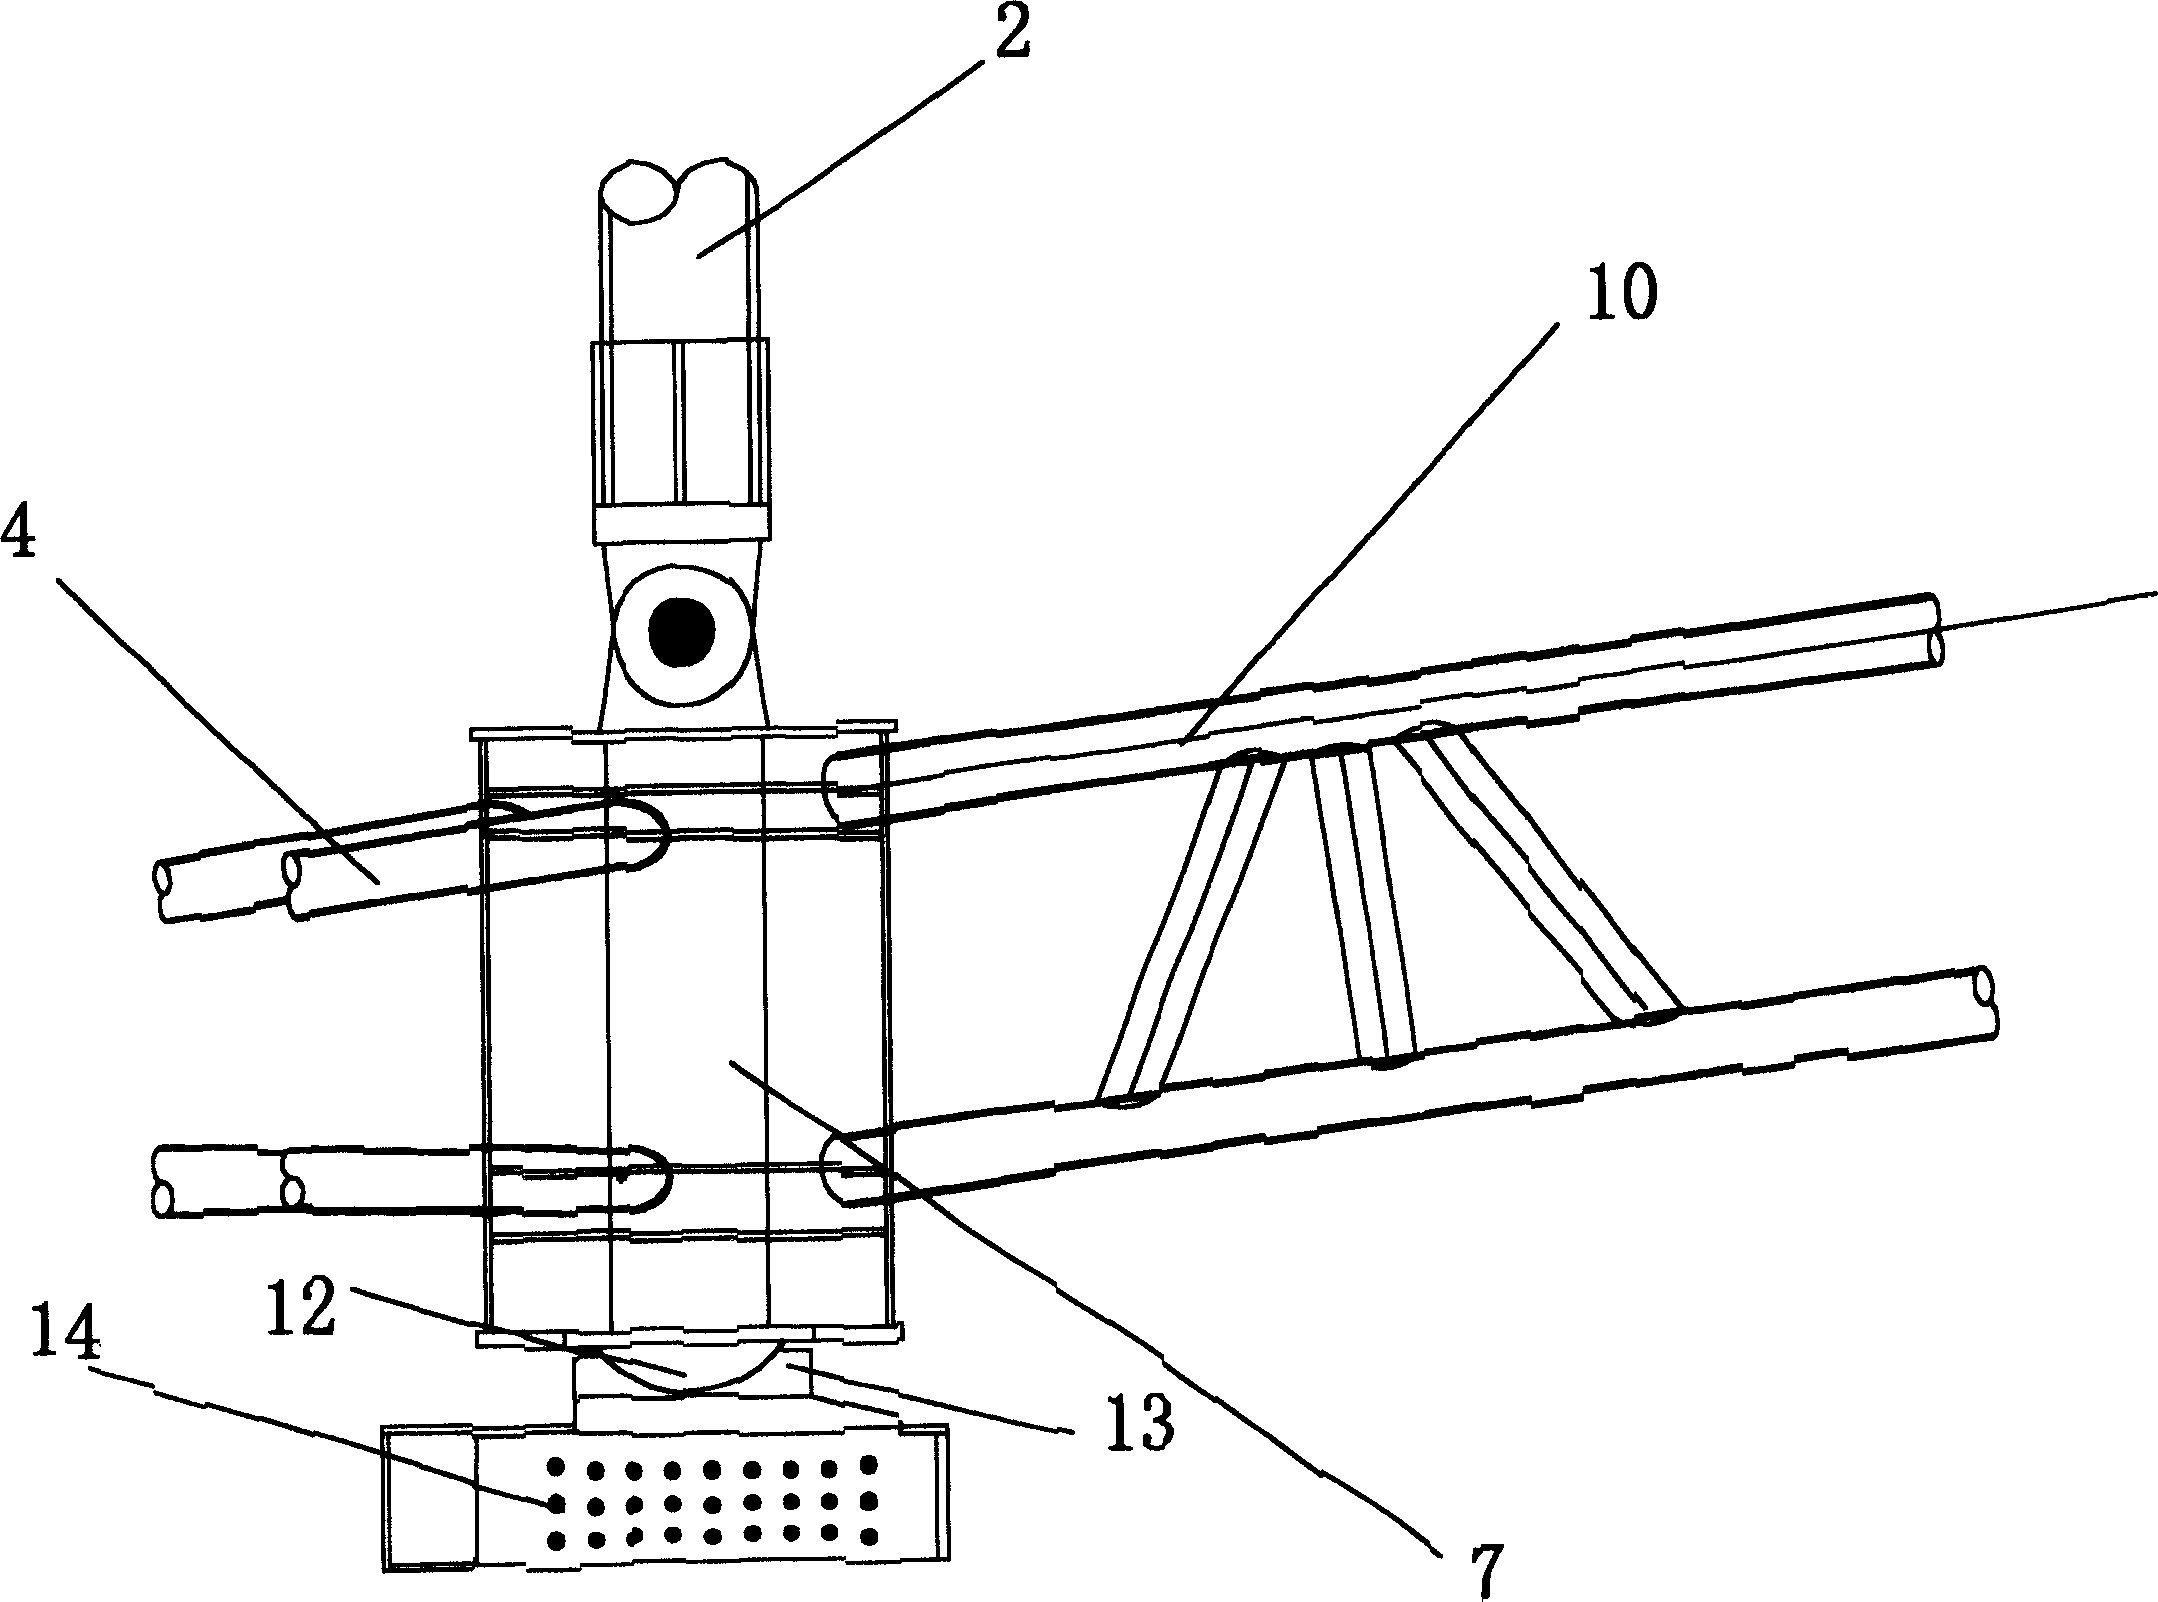 Construction method for large overhead cable-steel structure system